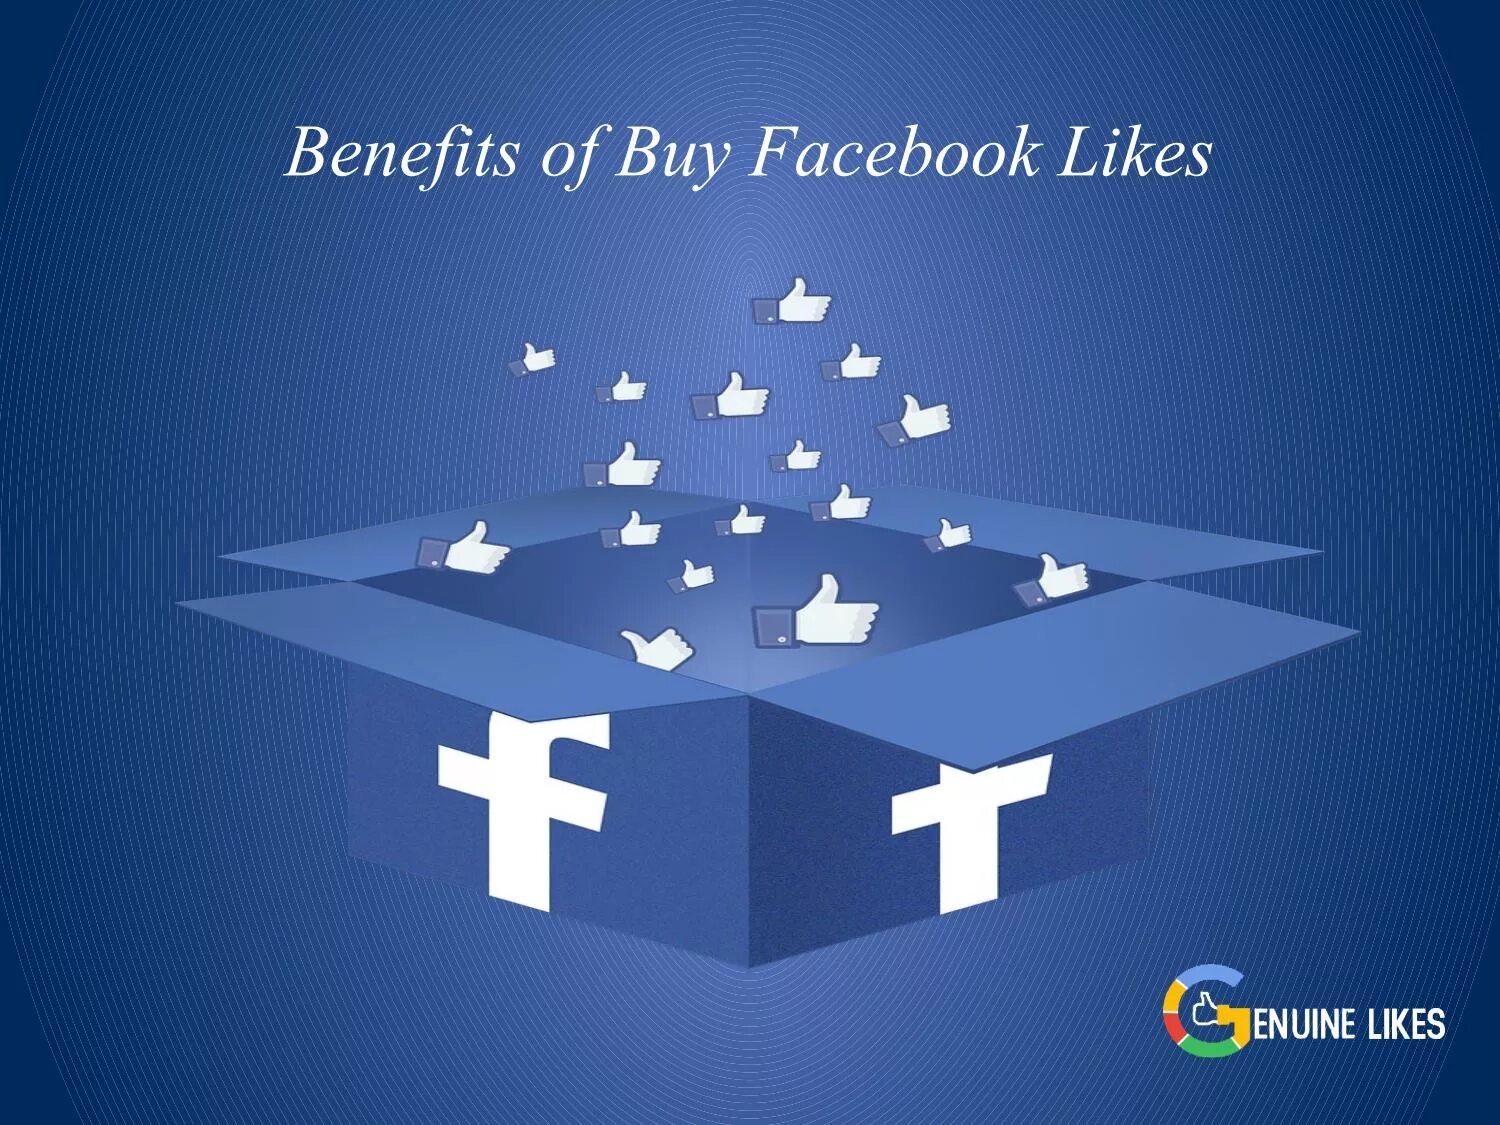 Facebook like. Buy likes. Facebook Нравится. Benefits заставка. Like your page